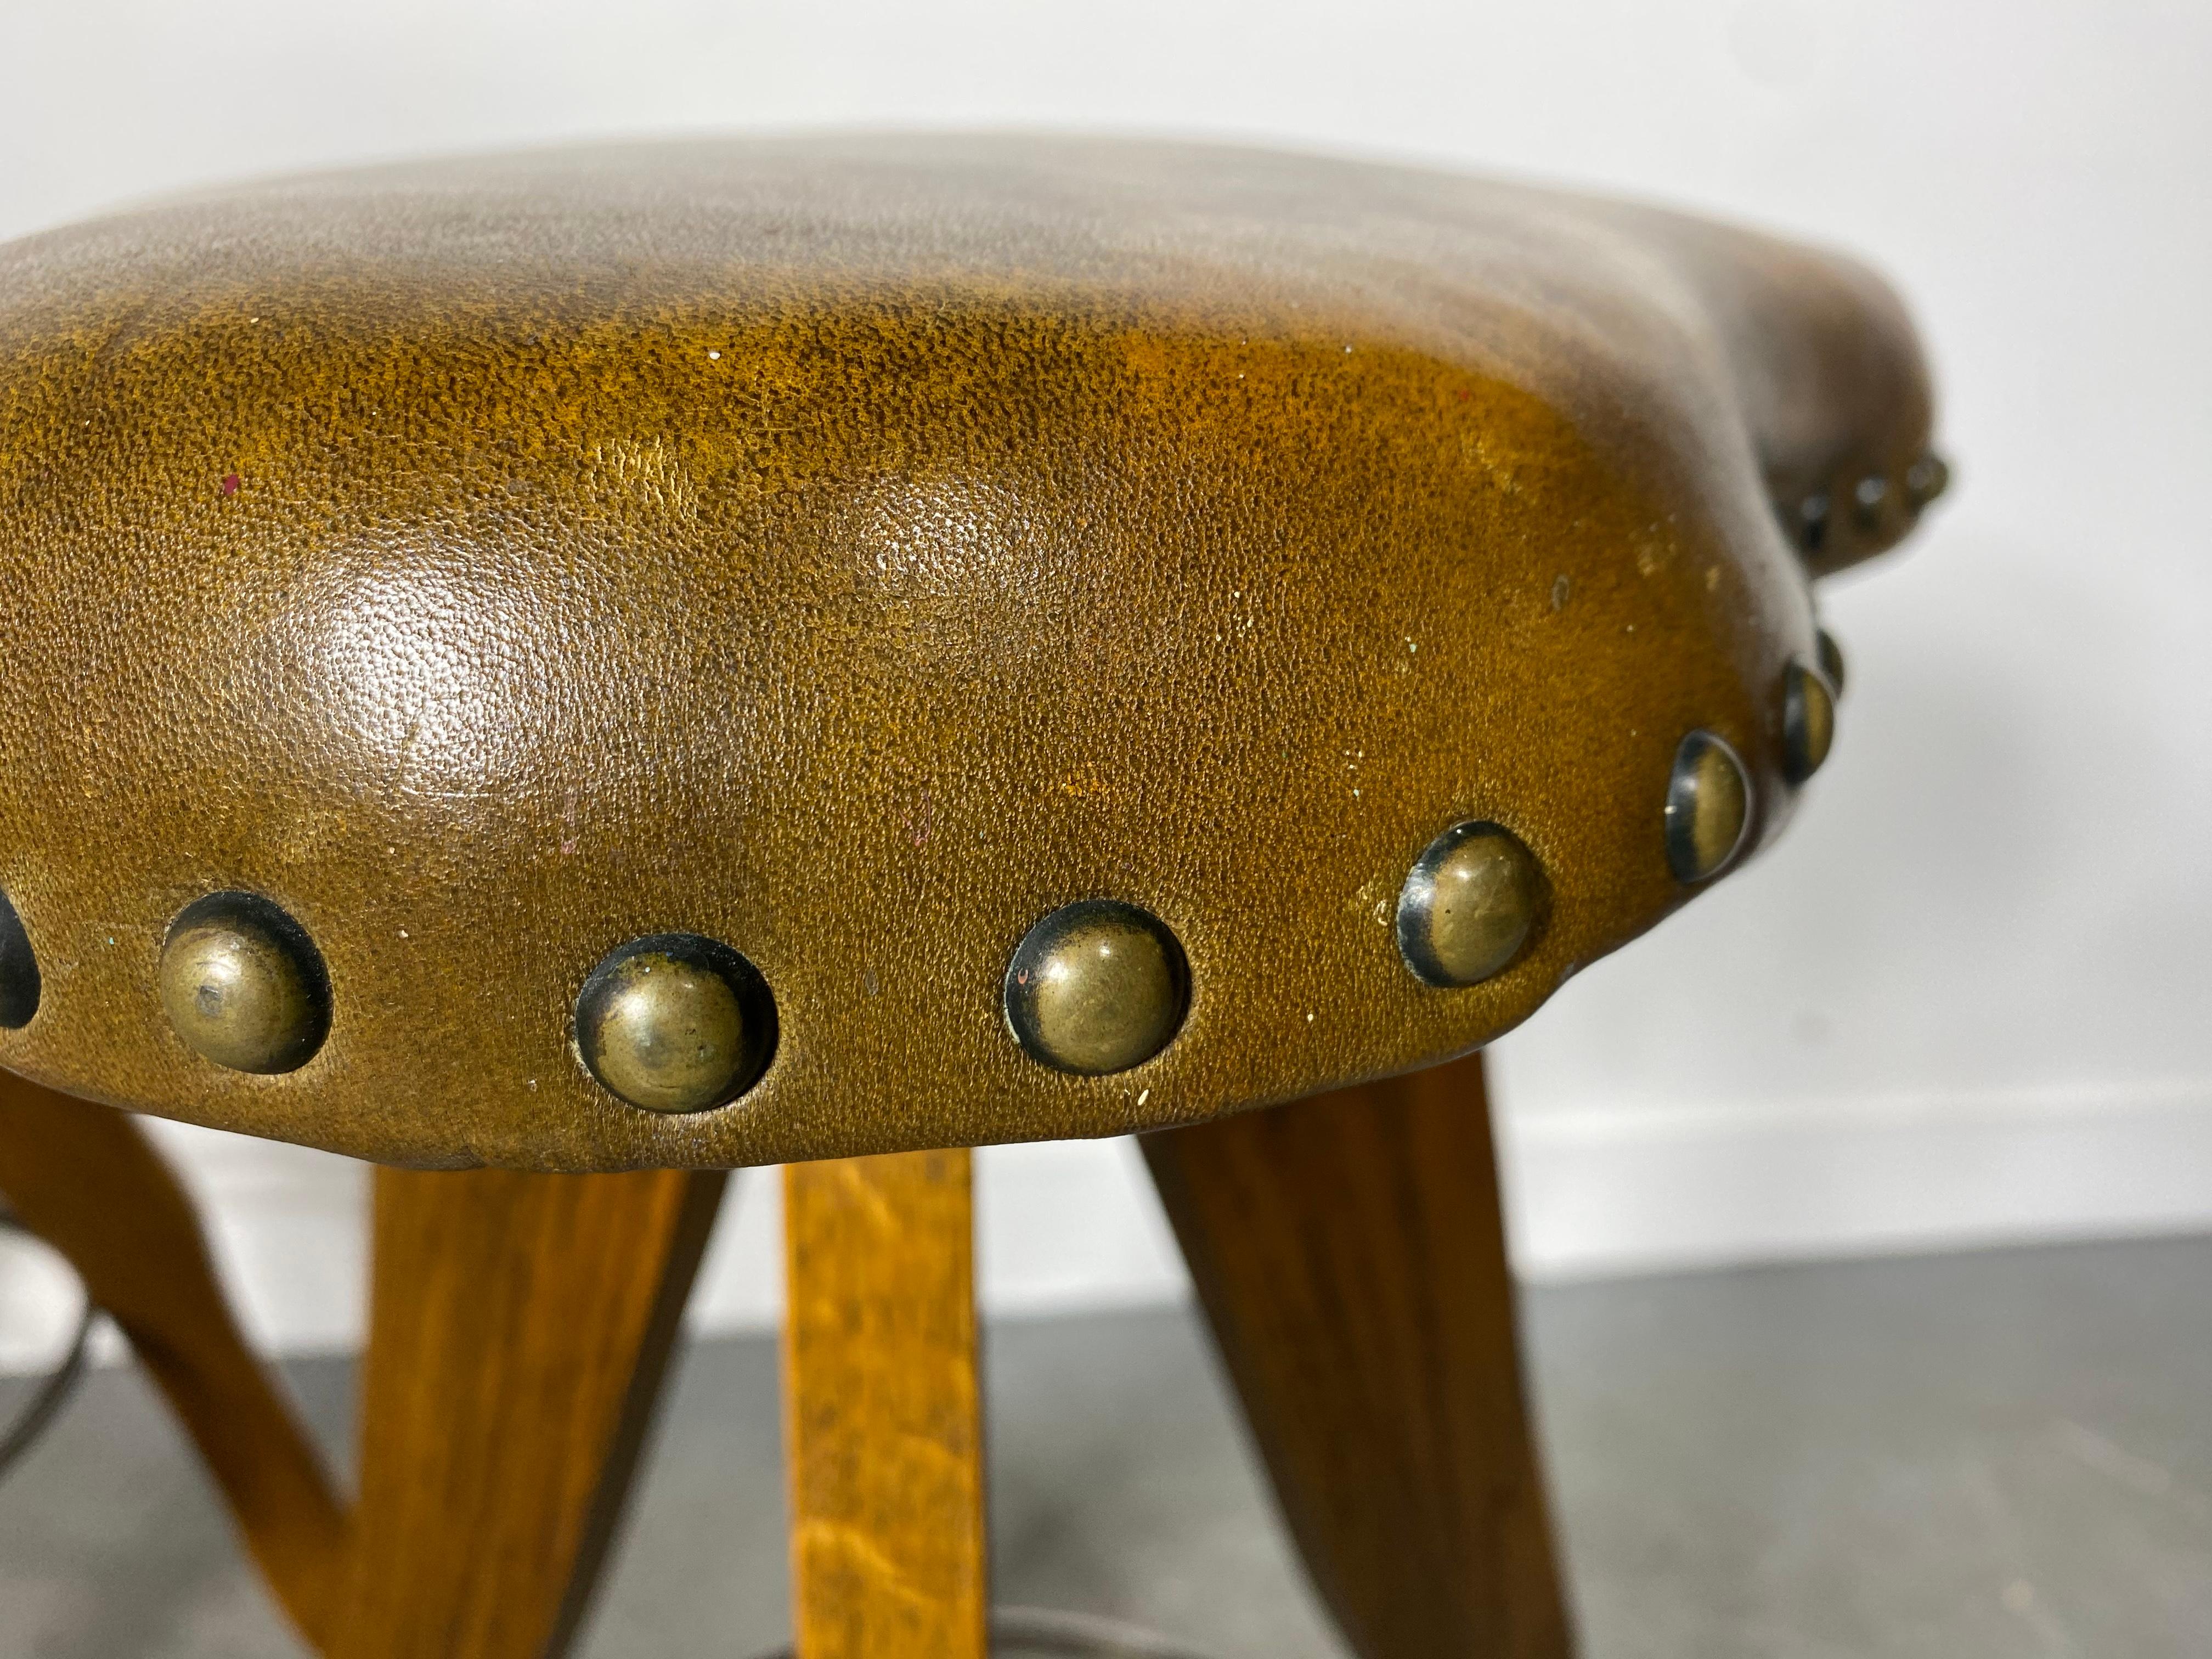 Unusual Rustic / Modern Farmhouse Oak and Leather Stools, Clover Shape Tops In Good Condition For Sale In Buffalo, NY